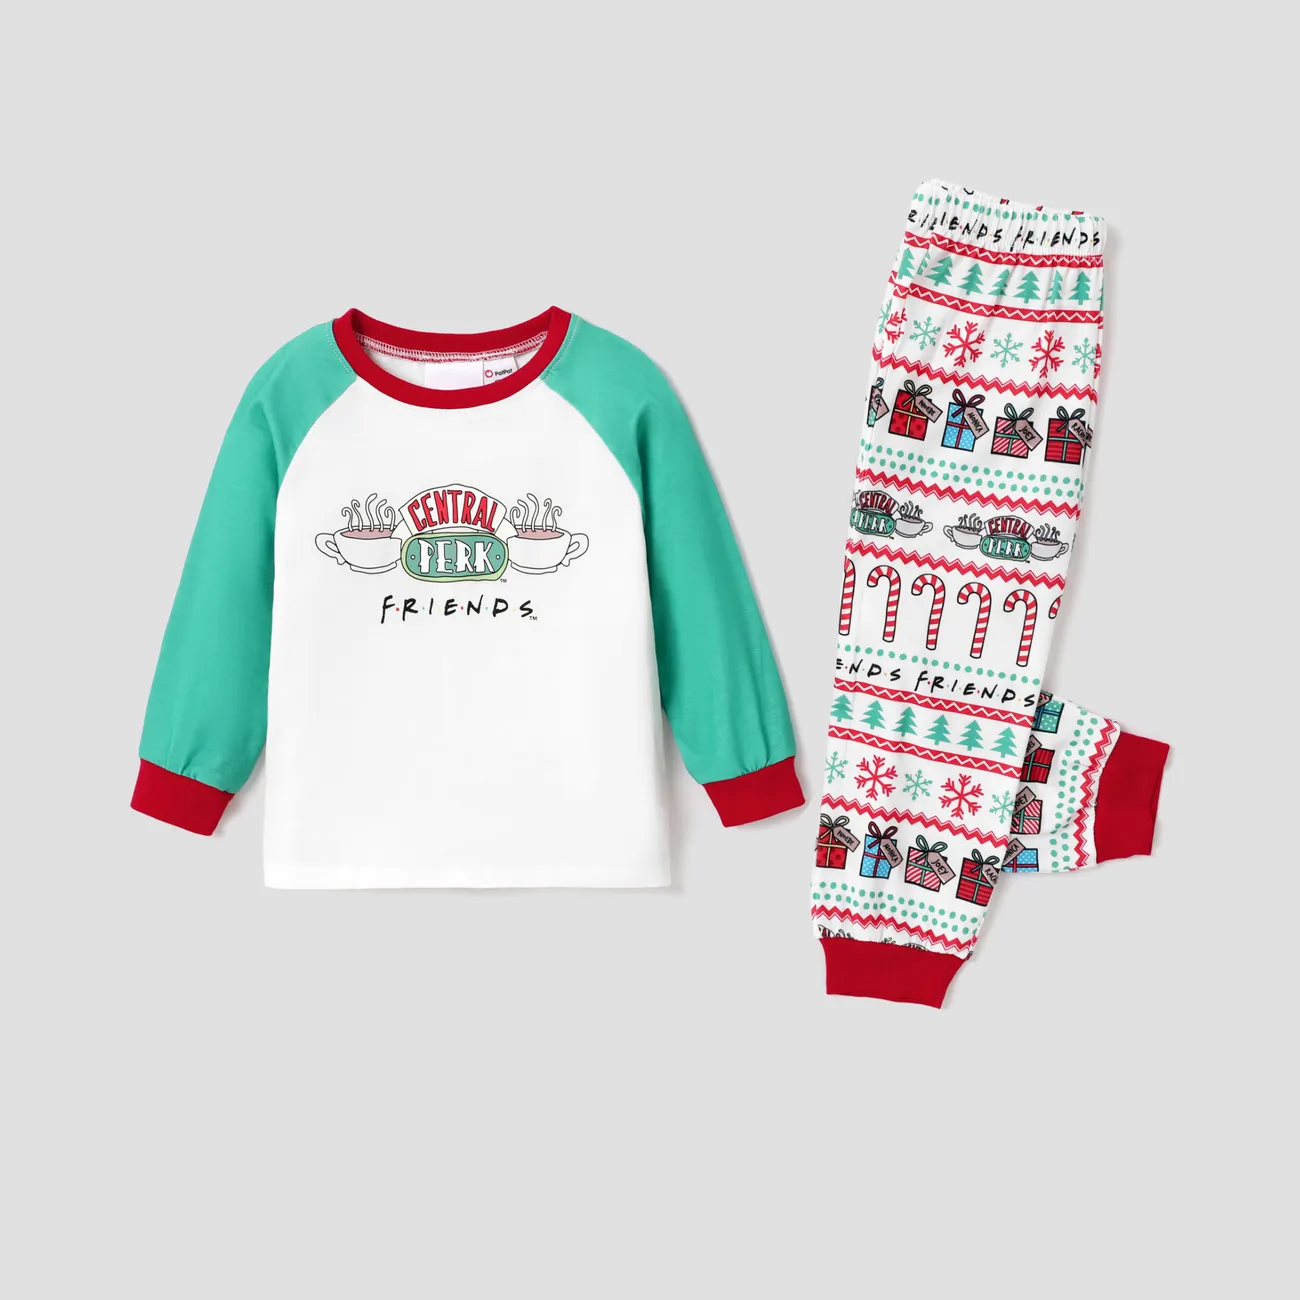 Friends Christmas Family Matching Character Print Long-sleeve Pajamas Sets(Flame Resistant) Multi-color big image 1